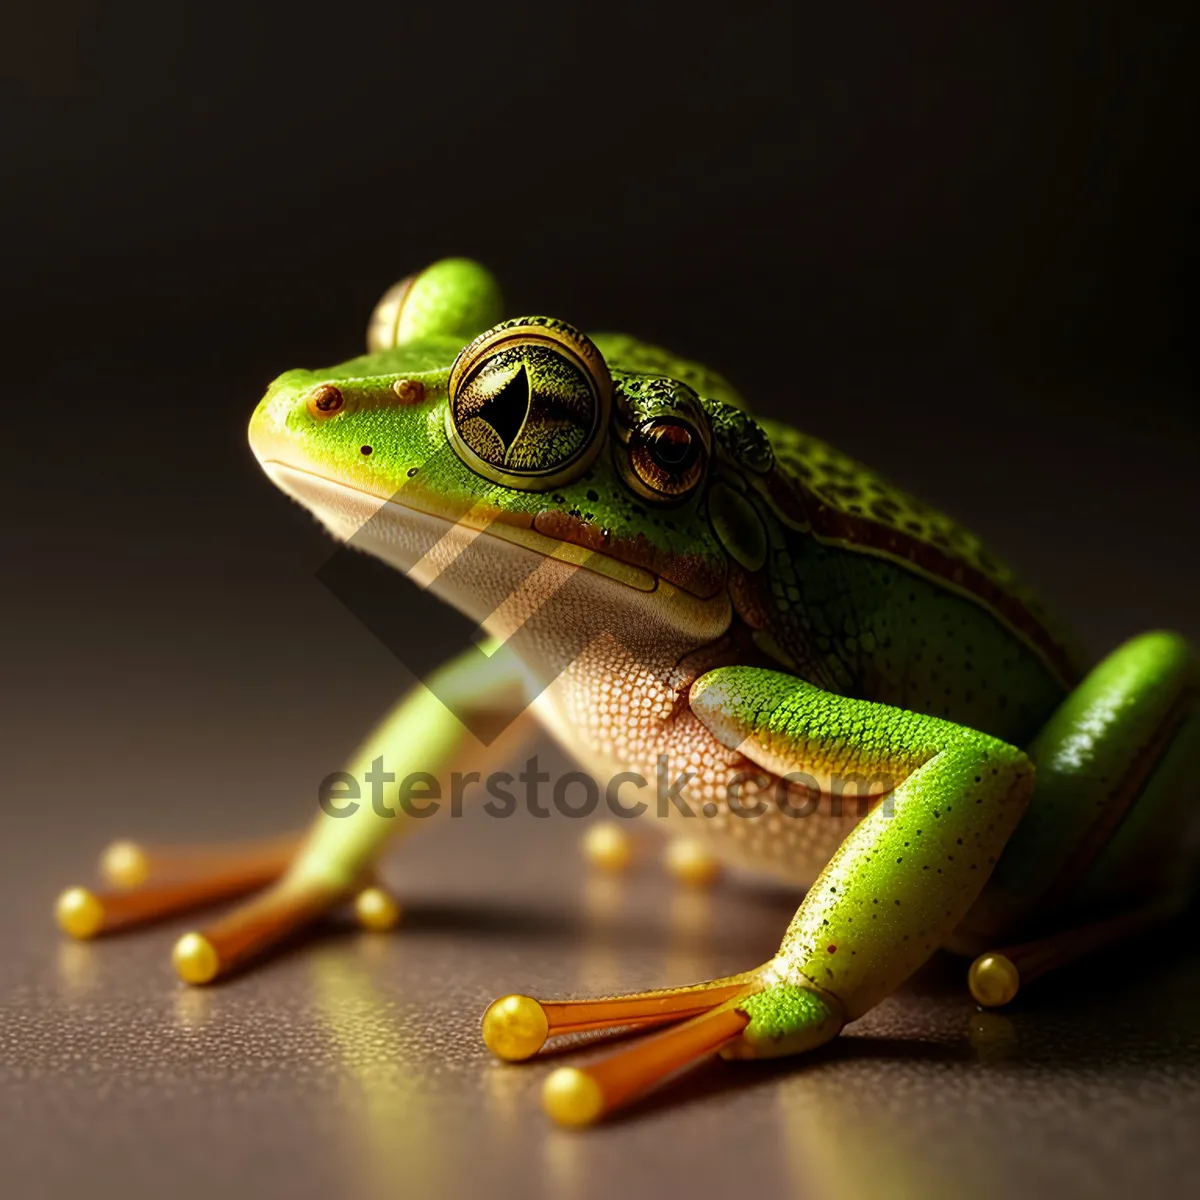 Picture of Vivid-eyed Tree Frog Perched on Branch